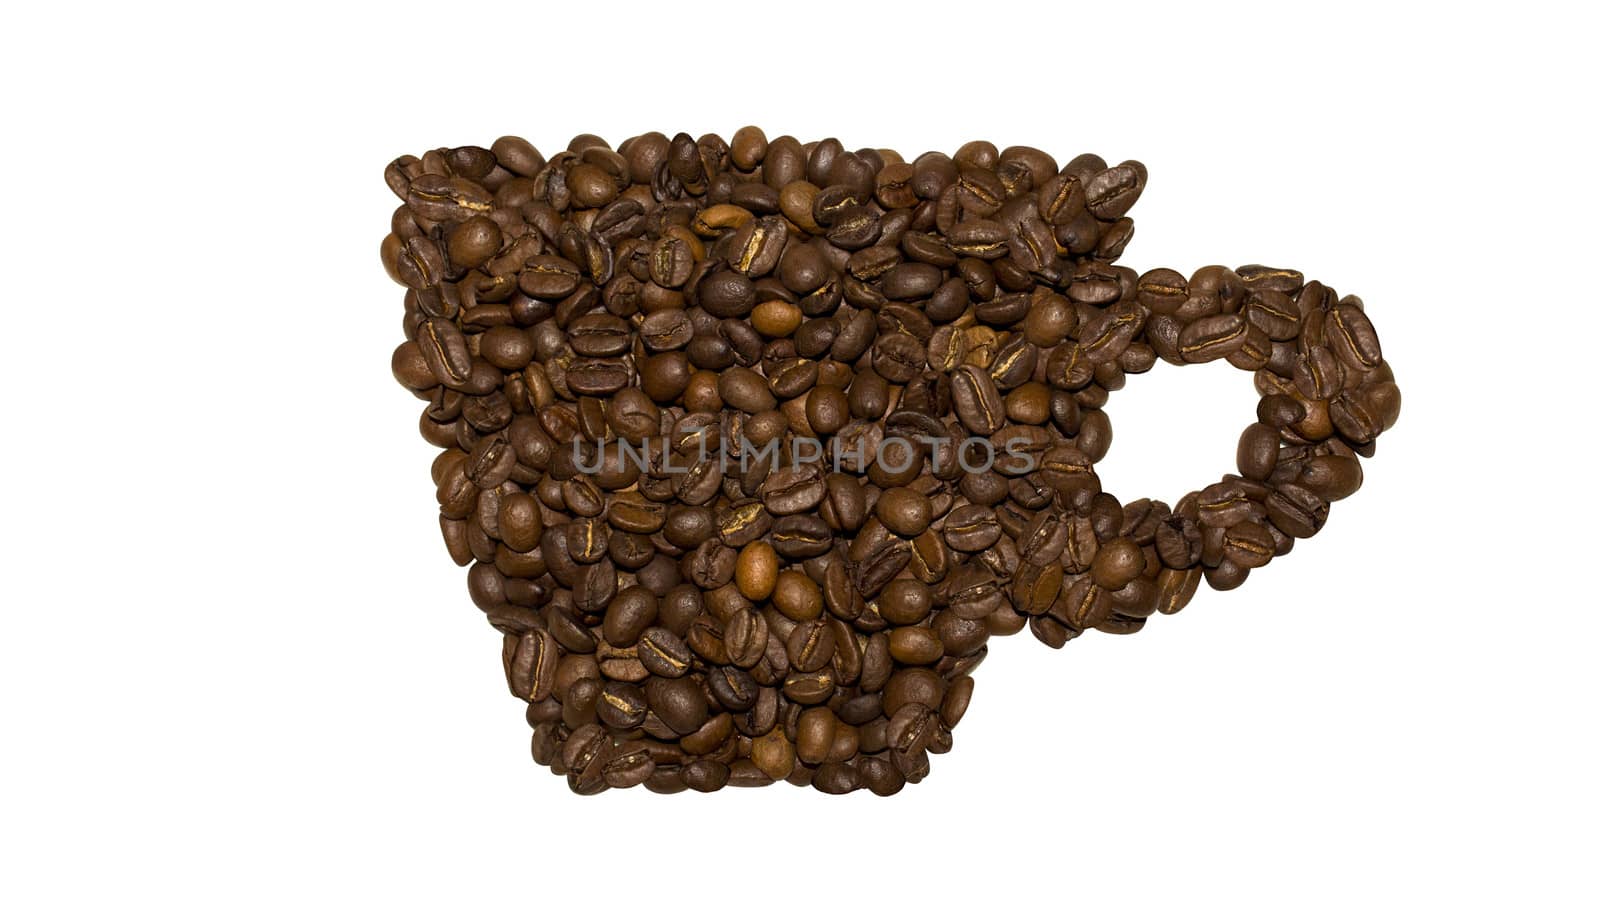 a Cup of coffee from coffee beans on a white background